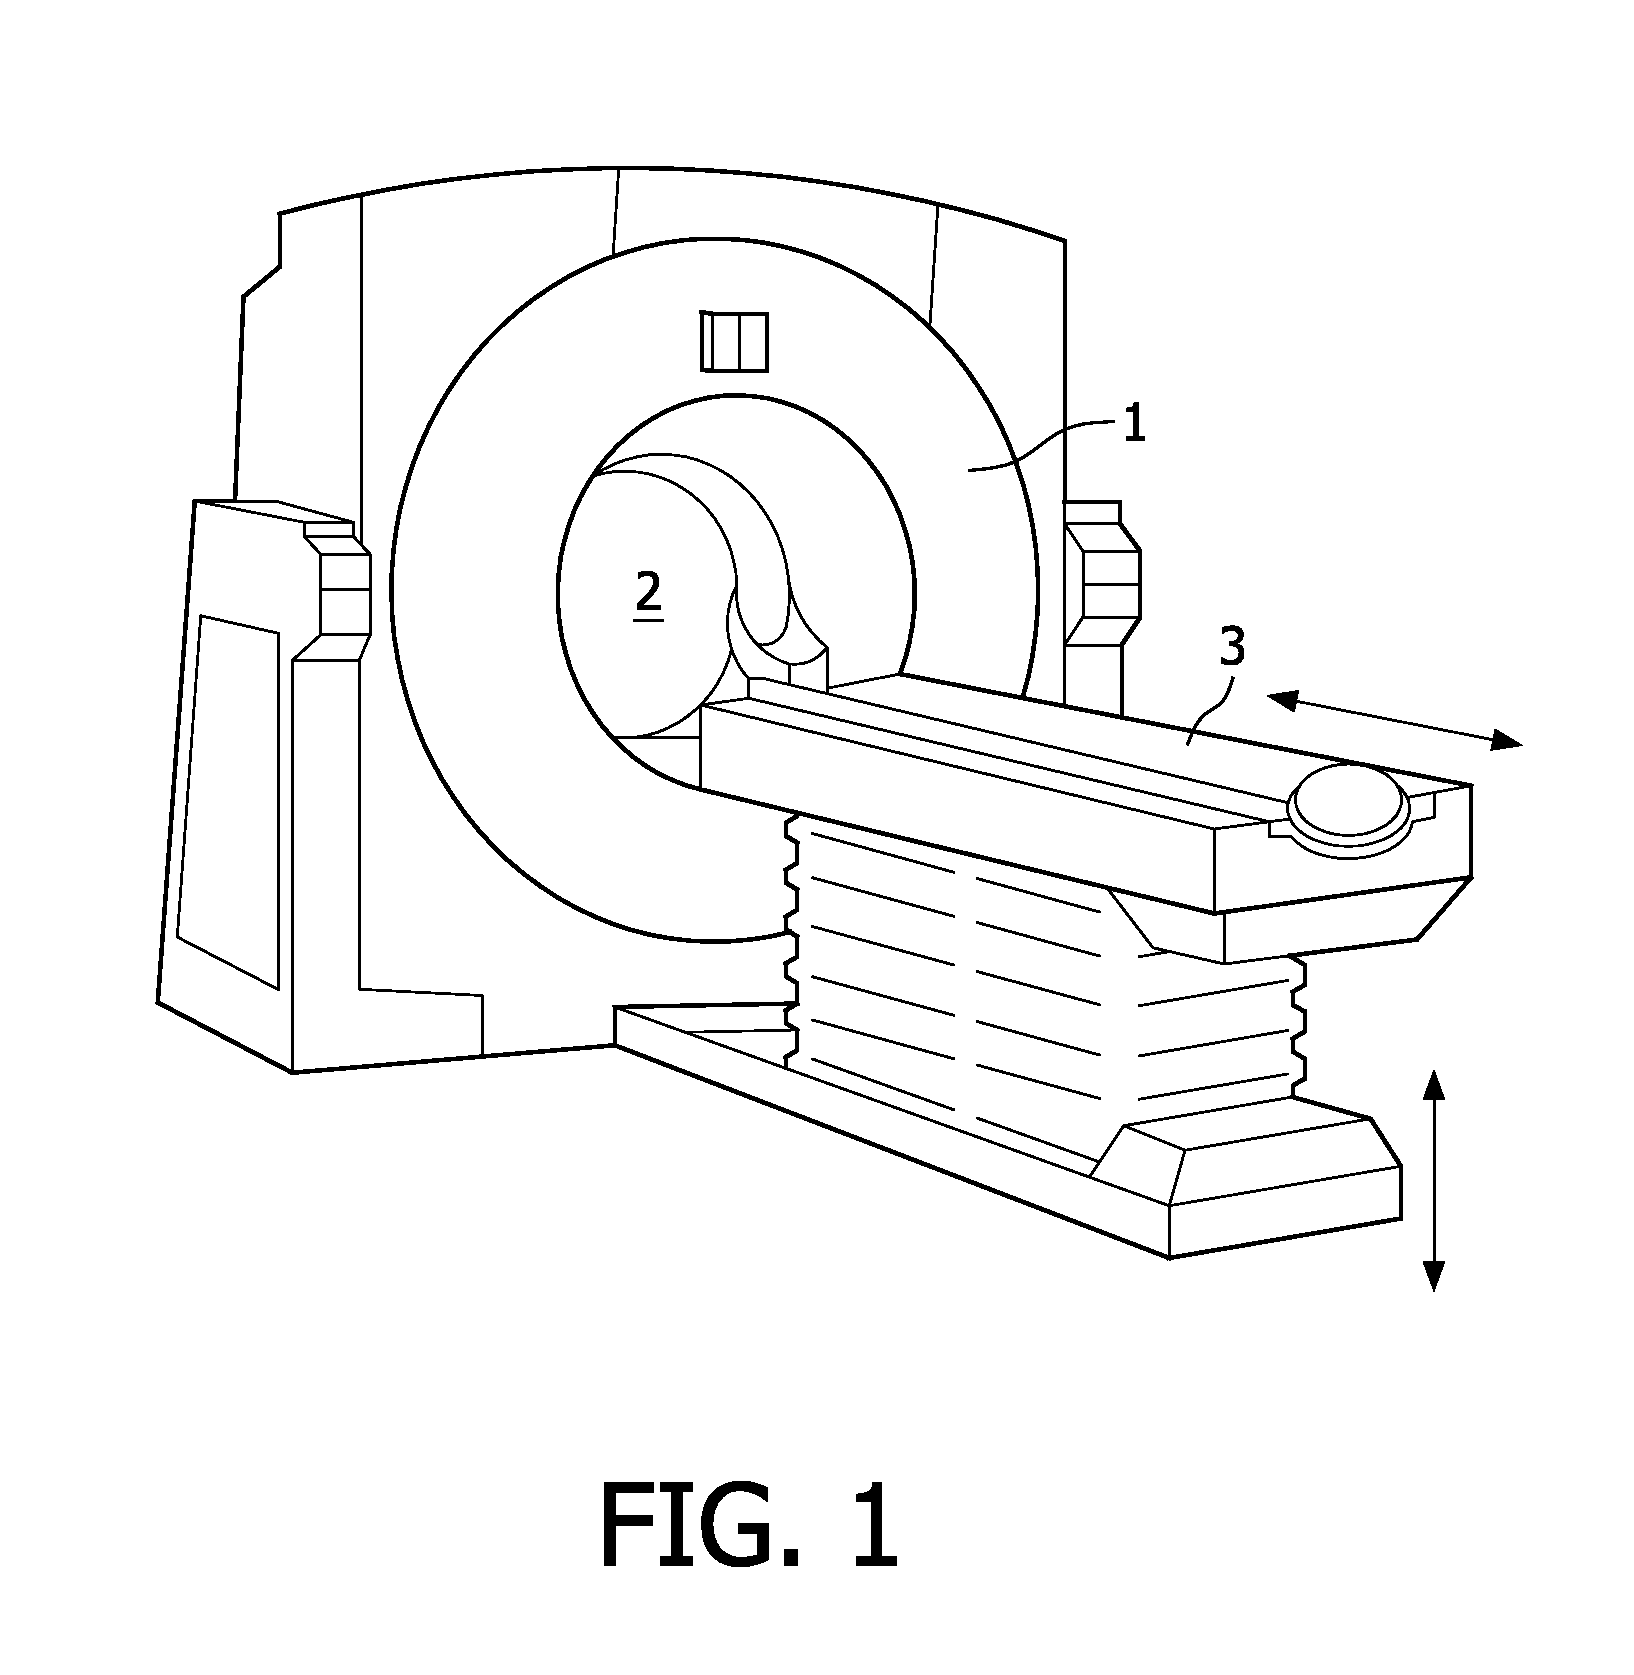 Power supply for an X-ray generator system